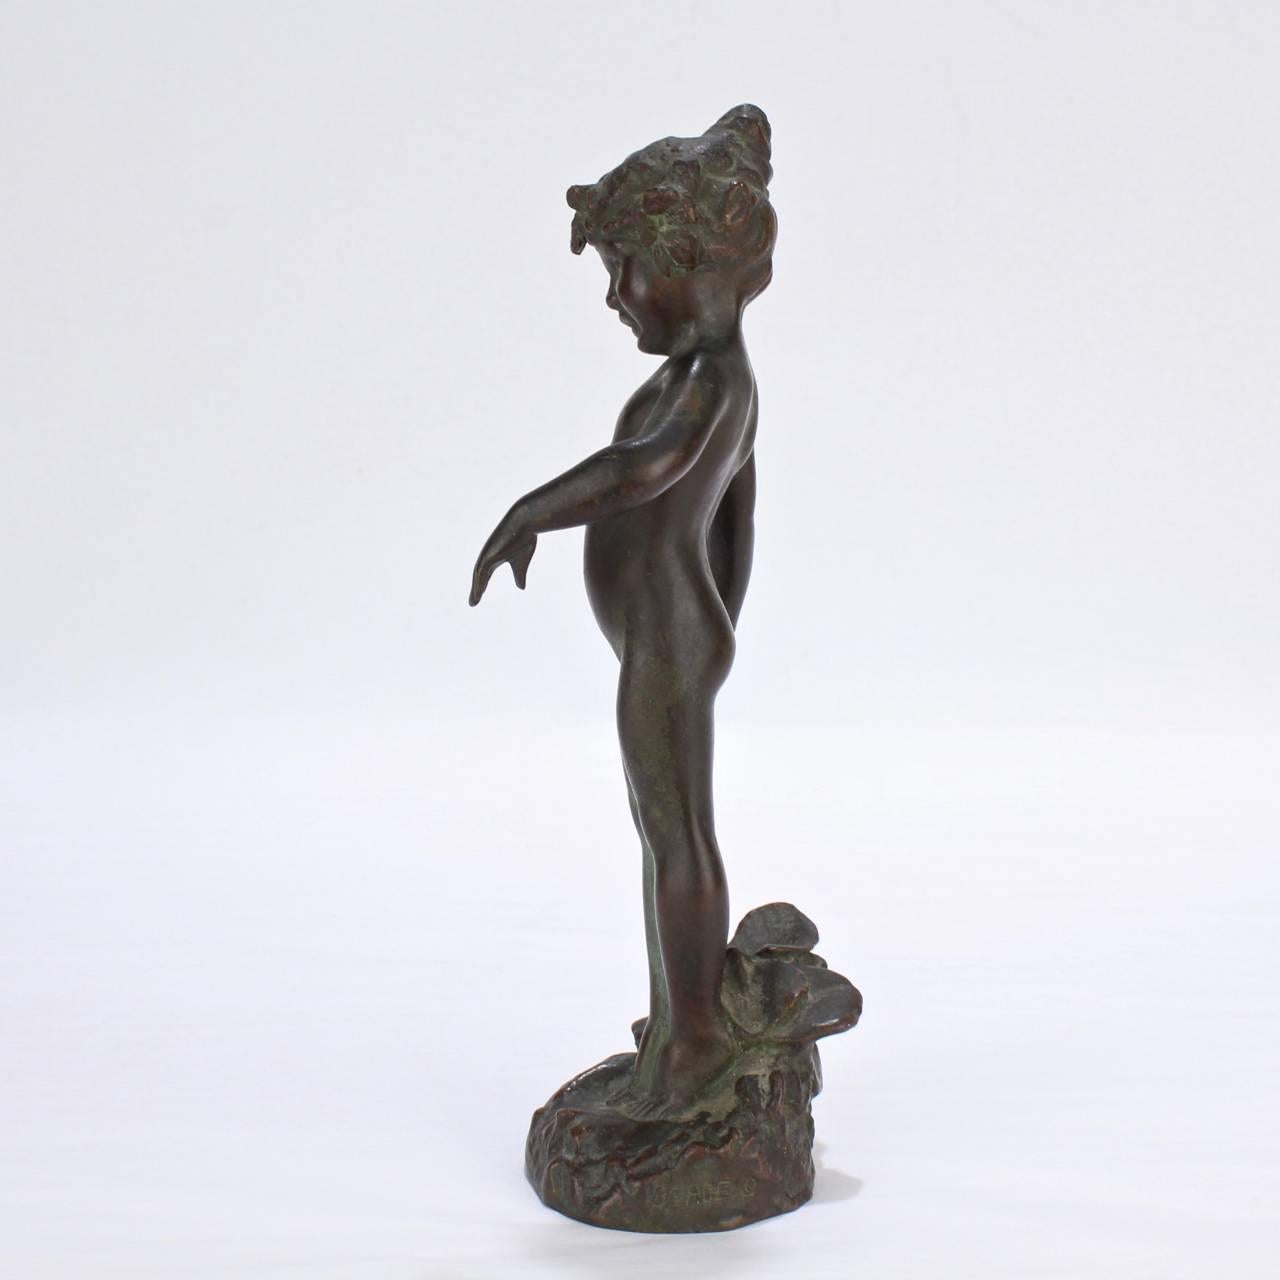 American Violet, an Antique Gorham Founders Water Nymph Bronze Sculpture by Edward Berge